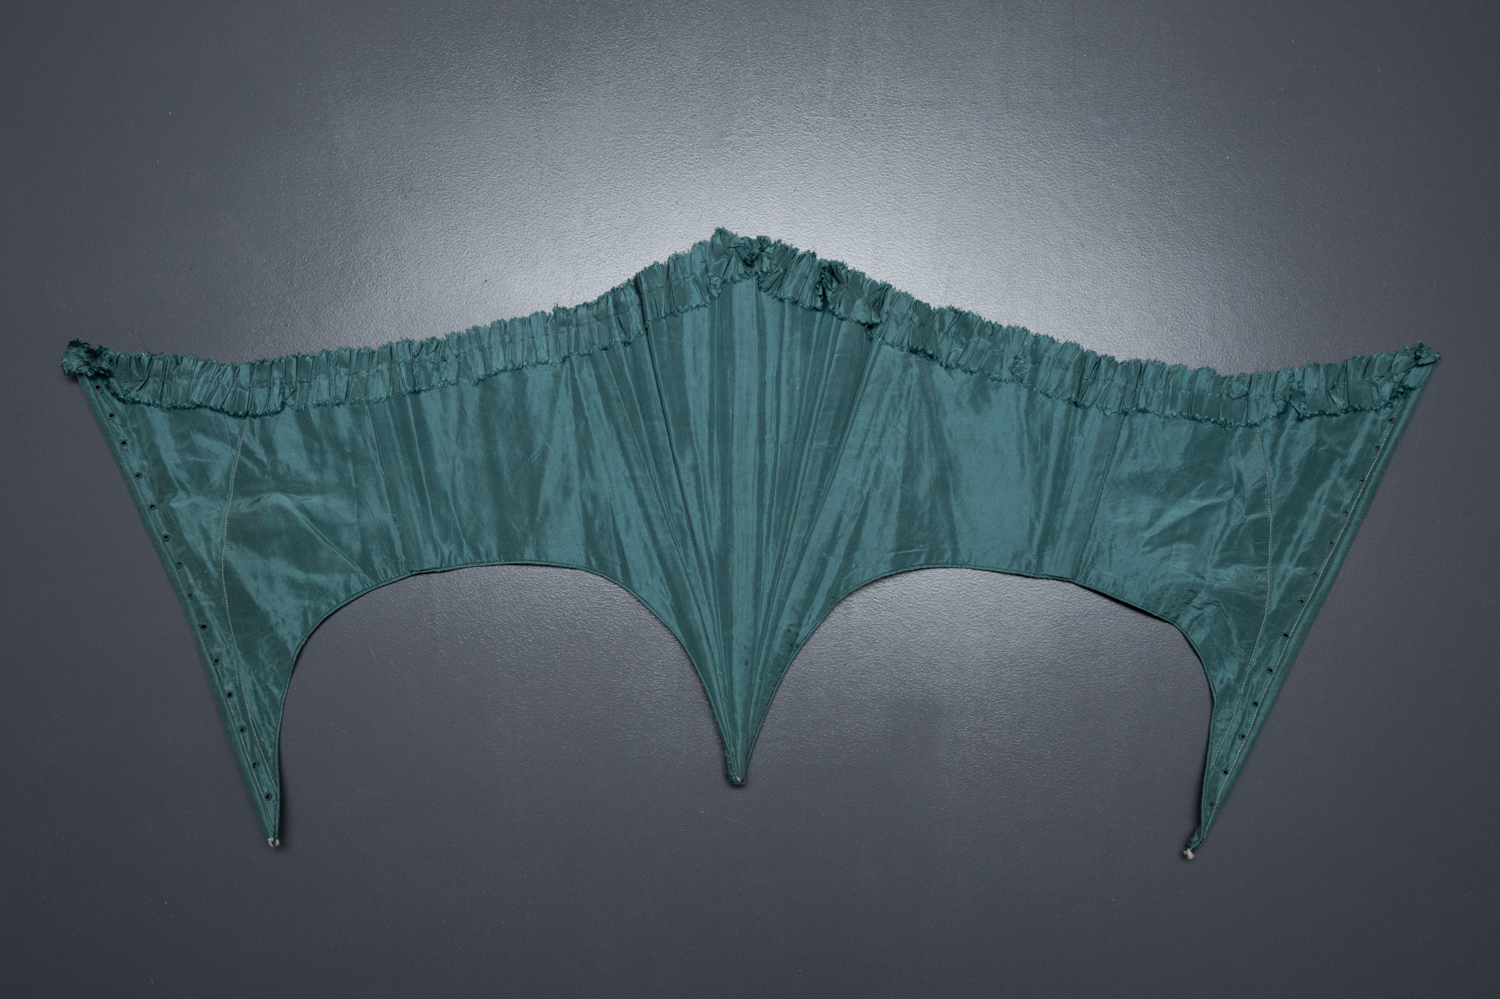 Green Silk Swiss Waist With Ruffled Trim, c. 1860s, USA. The Underpinnings Museum. Photography by Tigz Rice